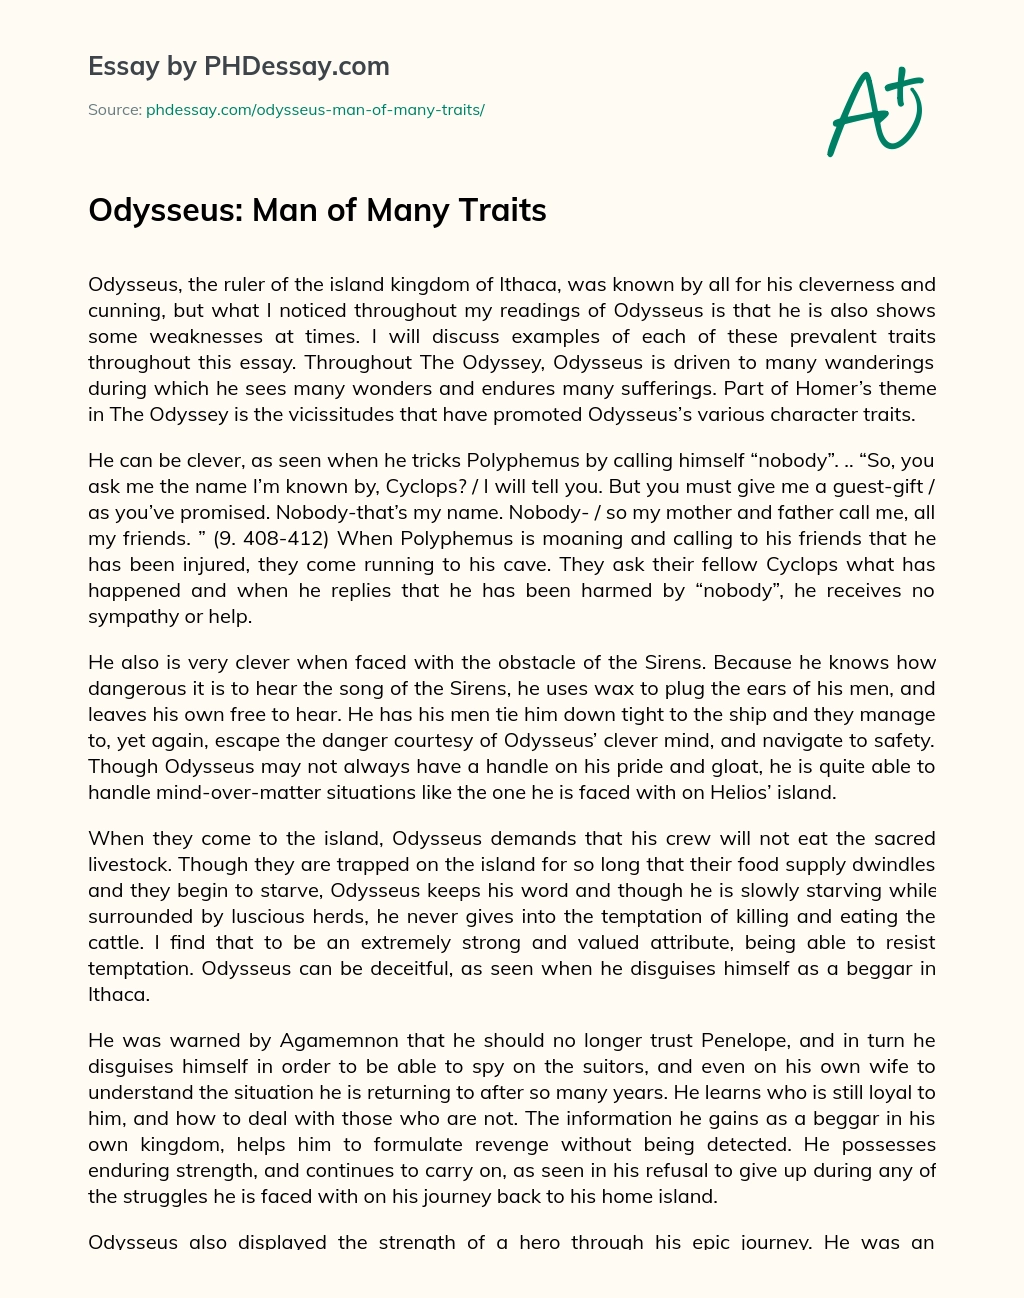 Реферат: Comparing Chracter Traits With Odysseus From The